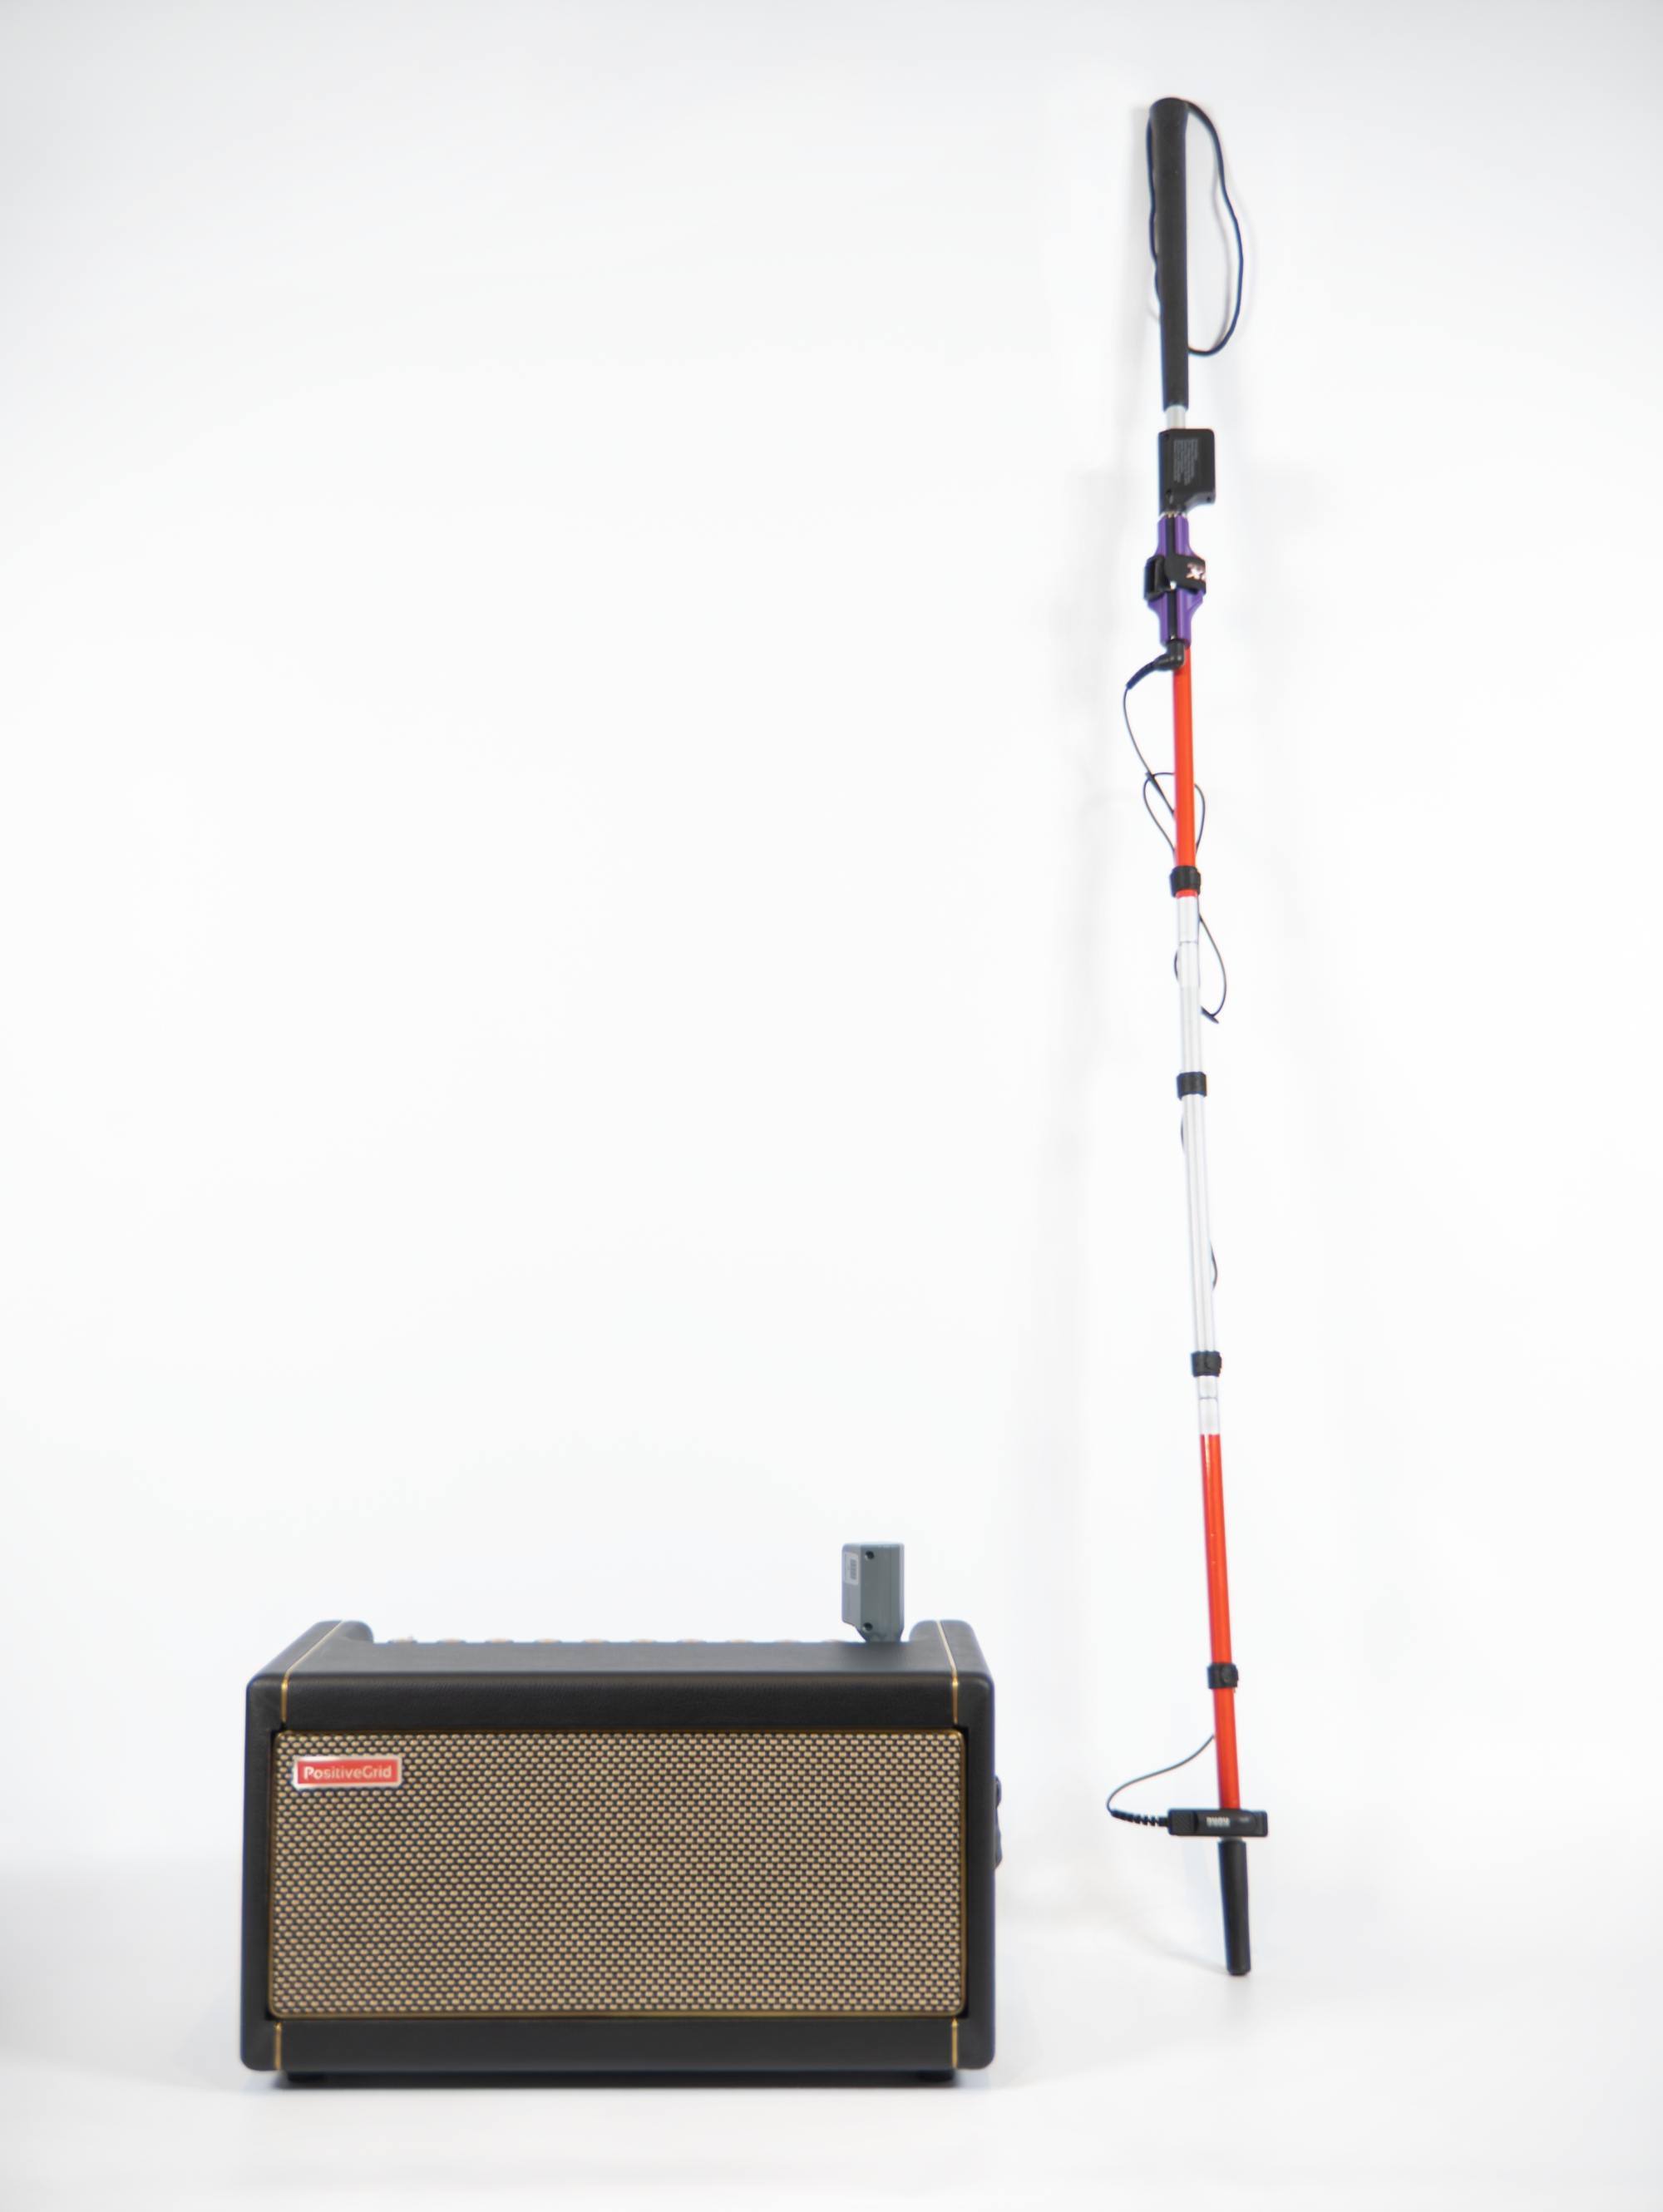 Leather and fabric modeling amplifier next to a vertical white cane with a contact microphone and wireless transmitter strapped to it